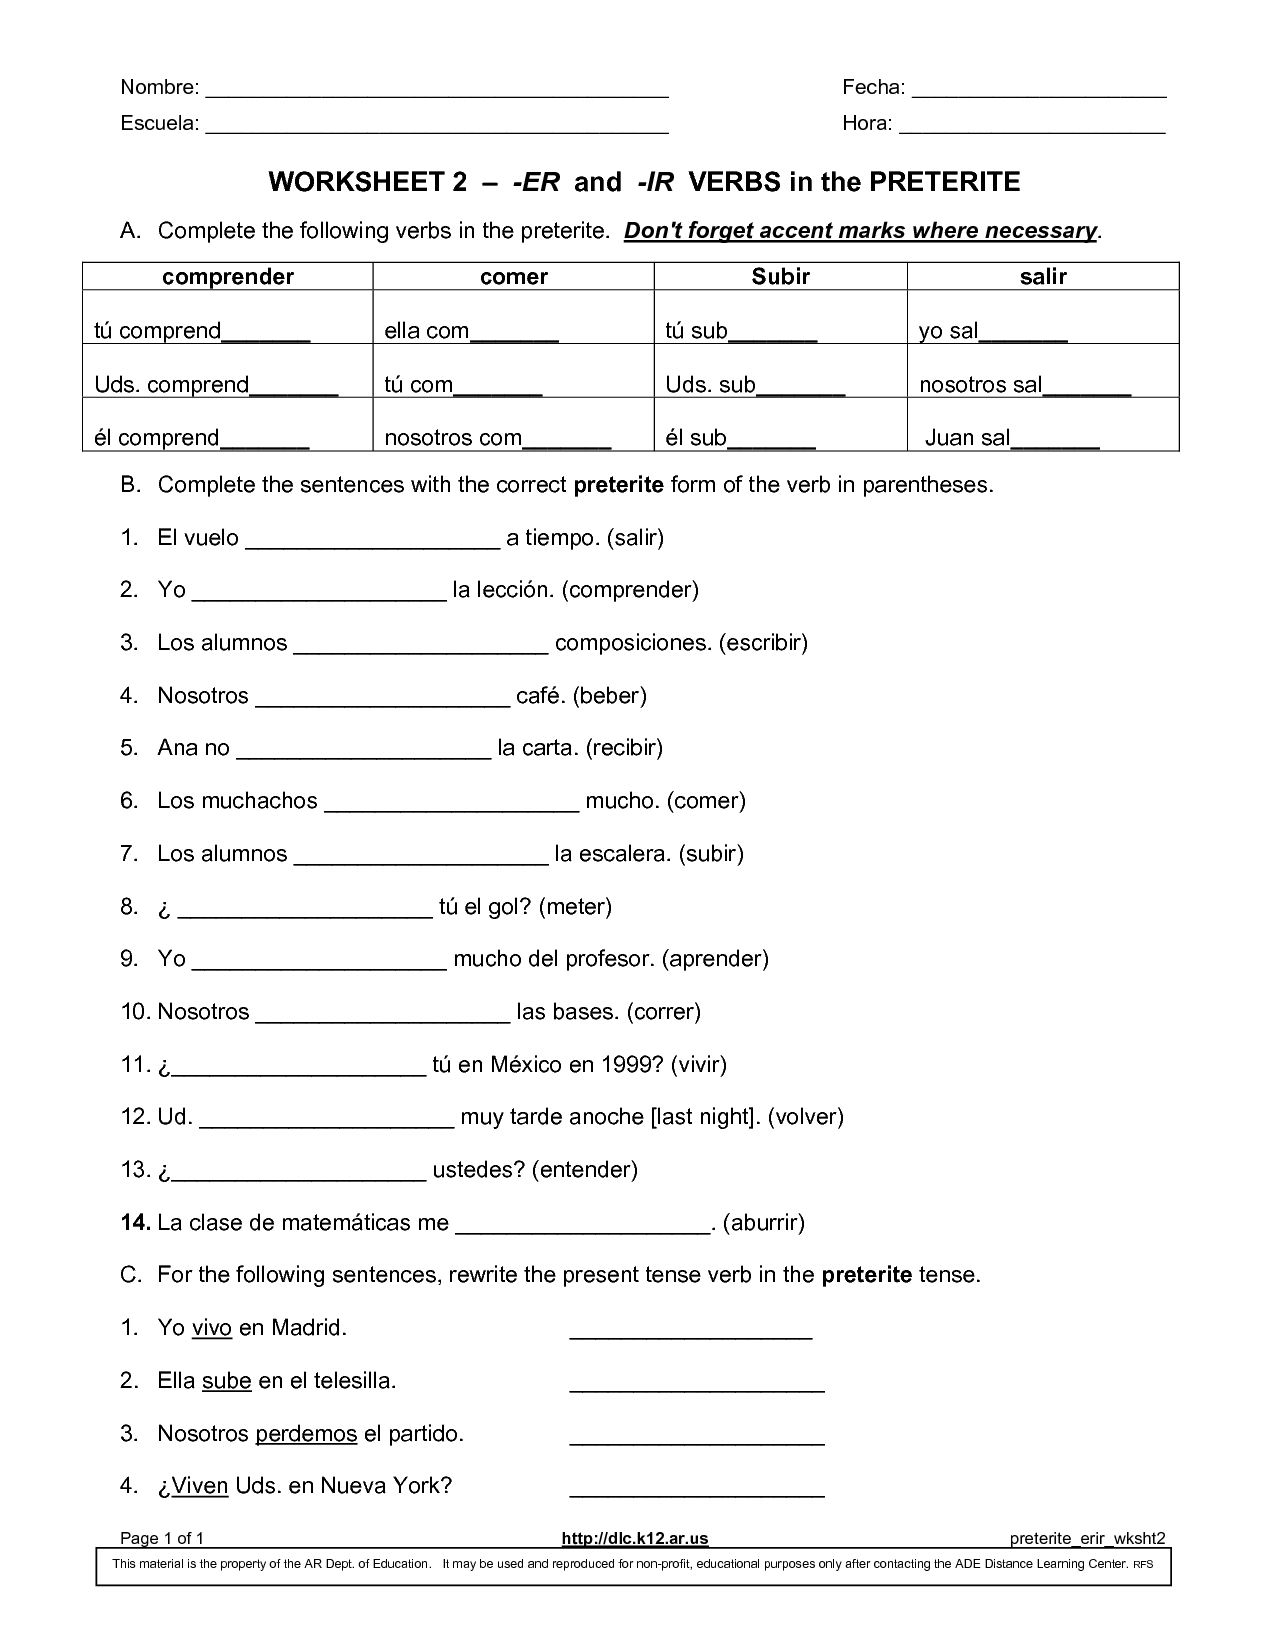 Worksheets For The Verb Ir